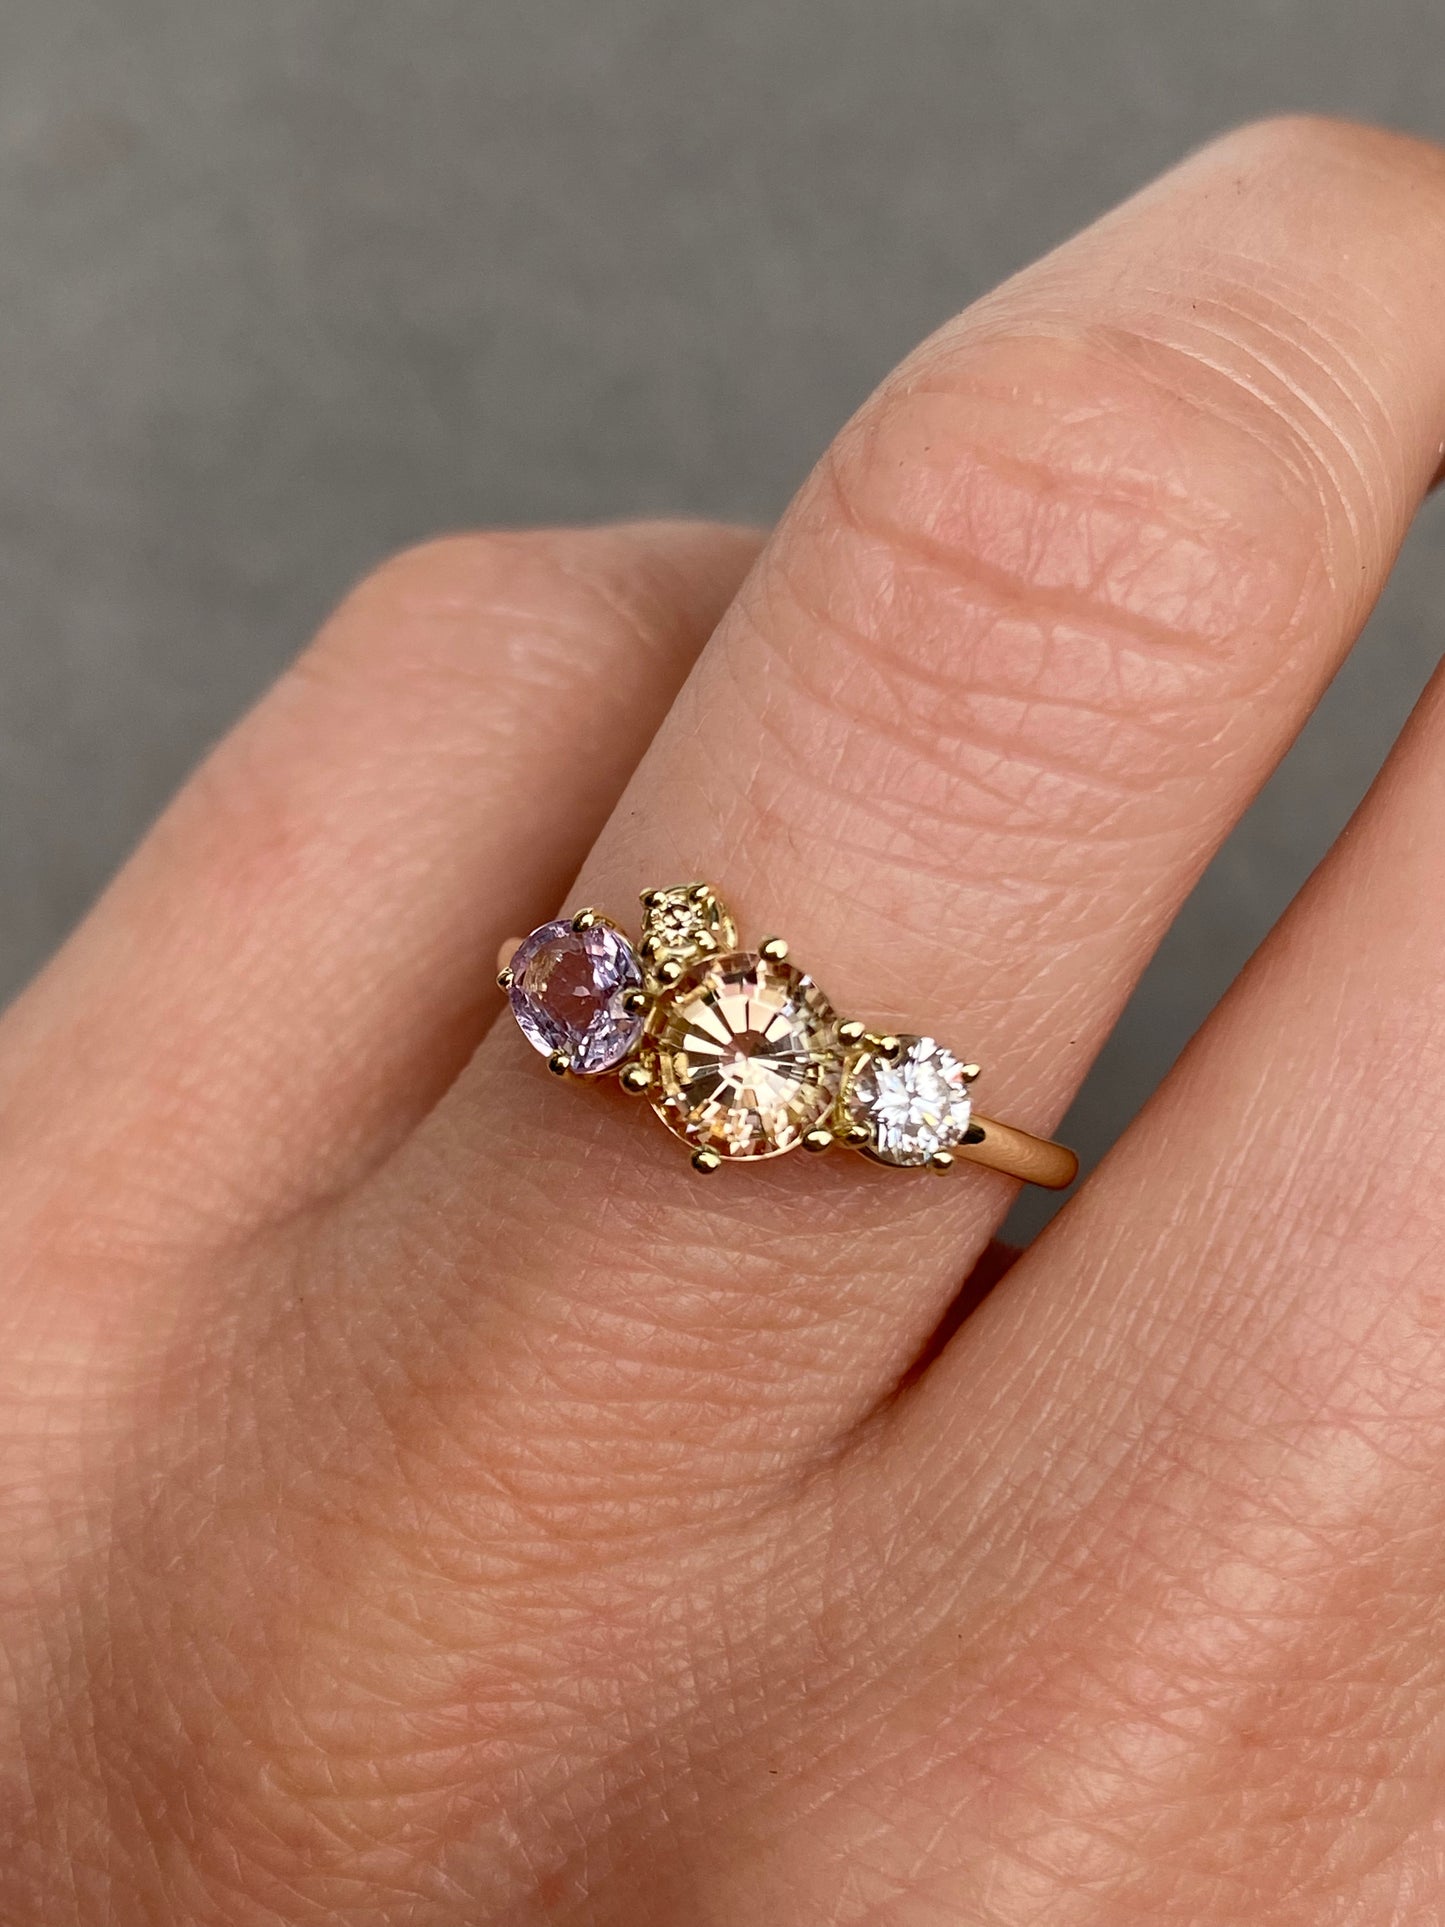 Mosaic ring with Diamond, Tourmaline and Pink sapphire in 14k yellow gold